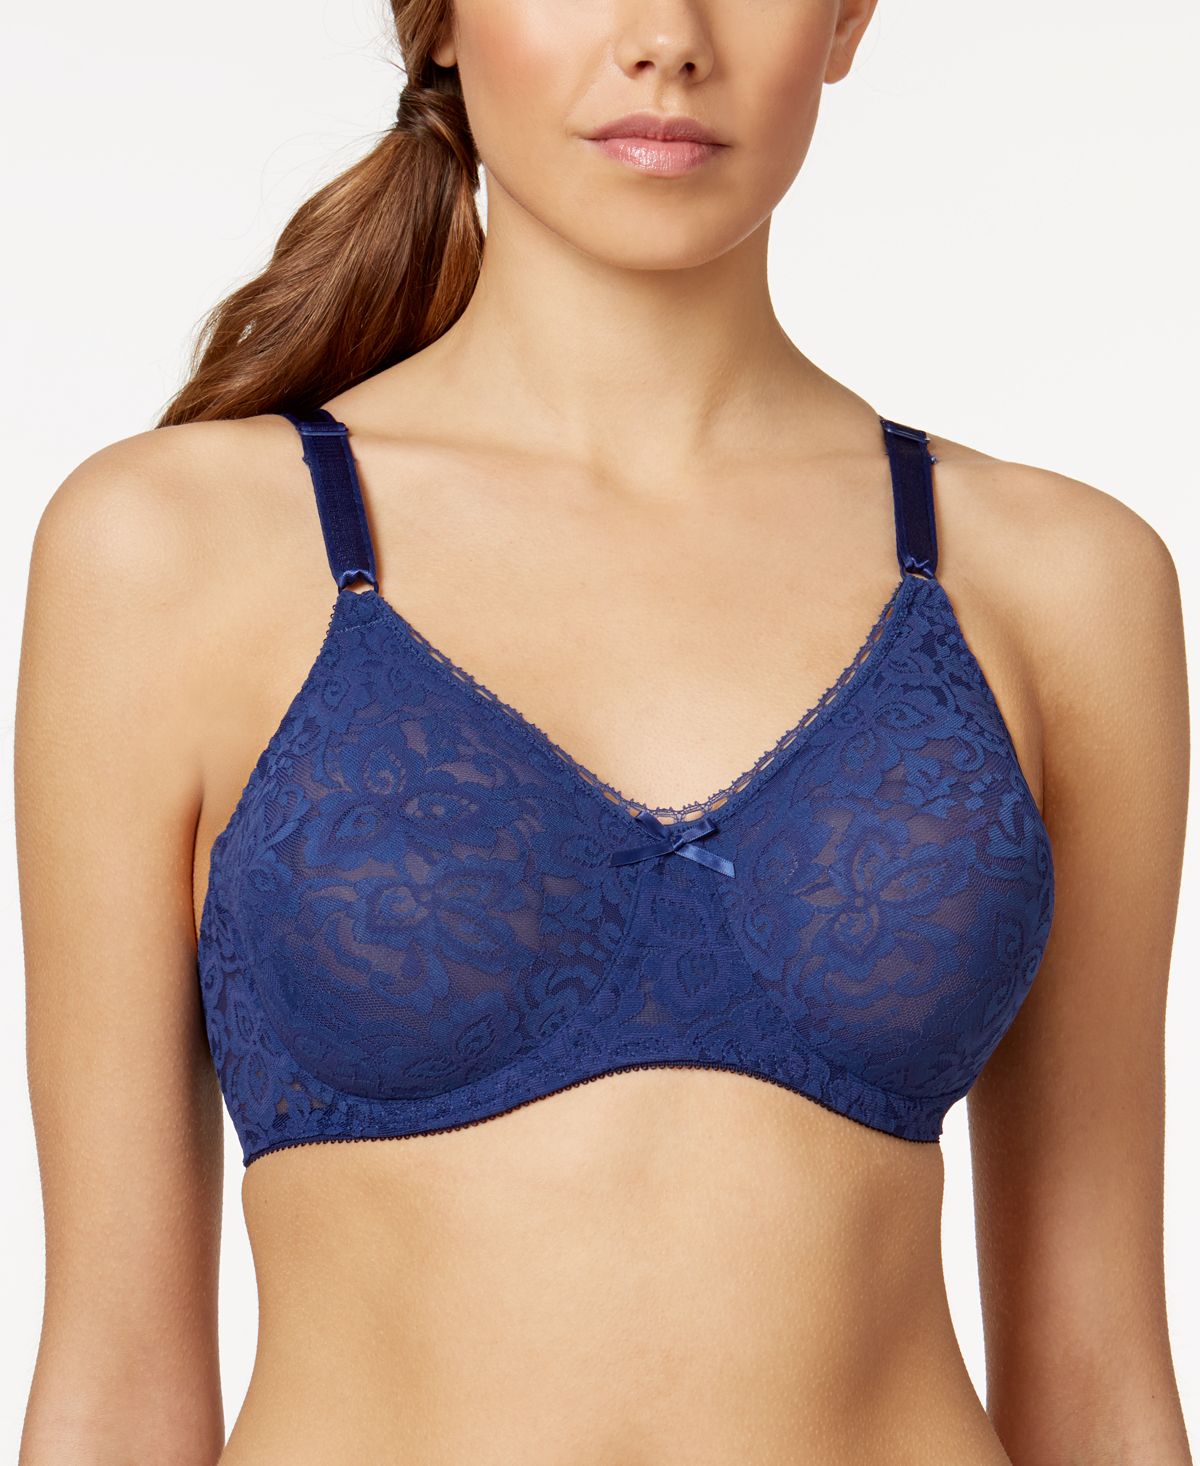 Bali Lace 'N Smooth Seamless Cup Underwire Bra 3432, Rosewood, 40DD 